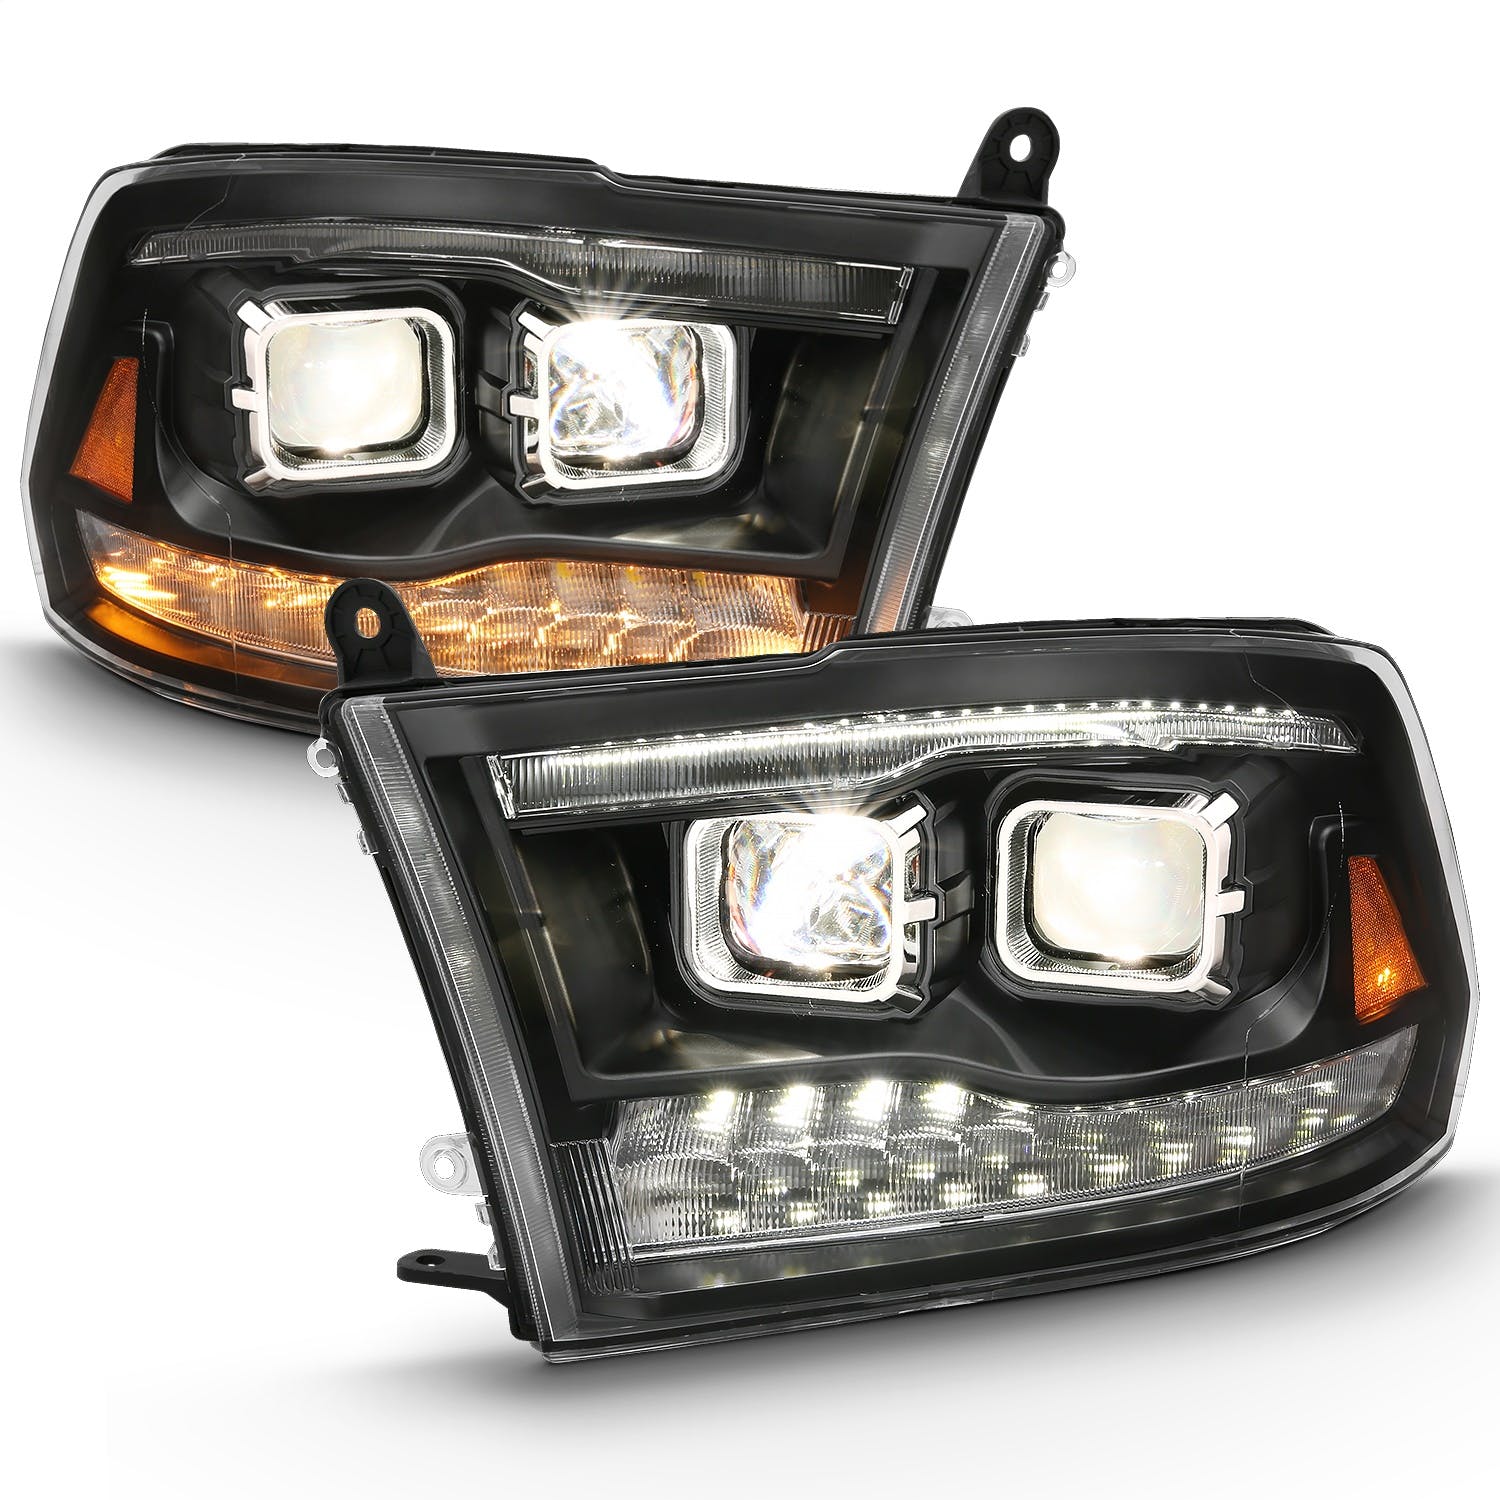 AnzoUSA 111442 Projector Headlights. Switchback Chrome Amber